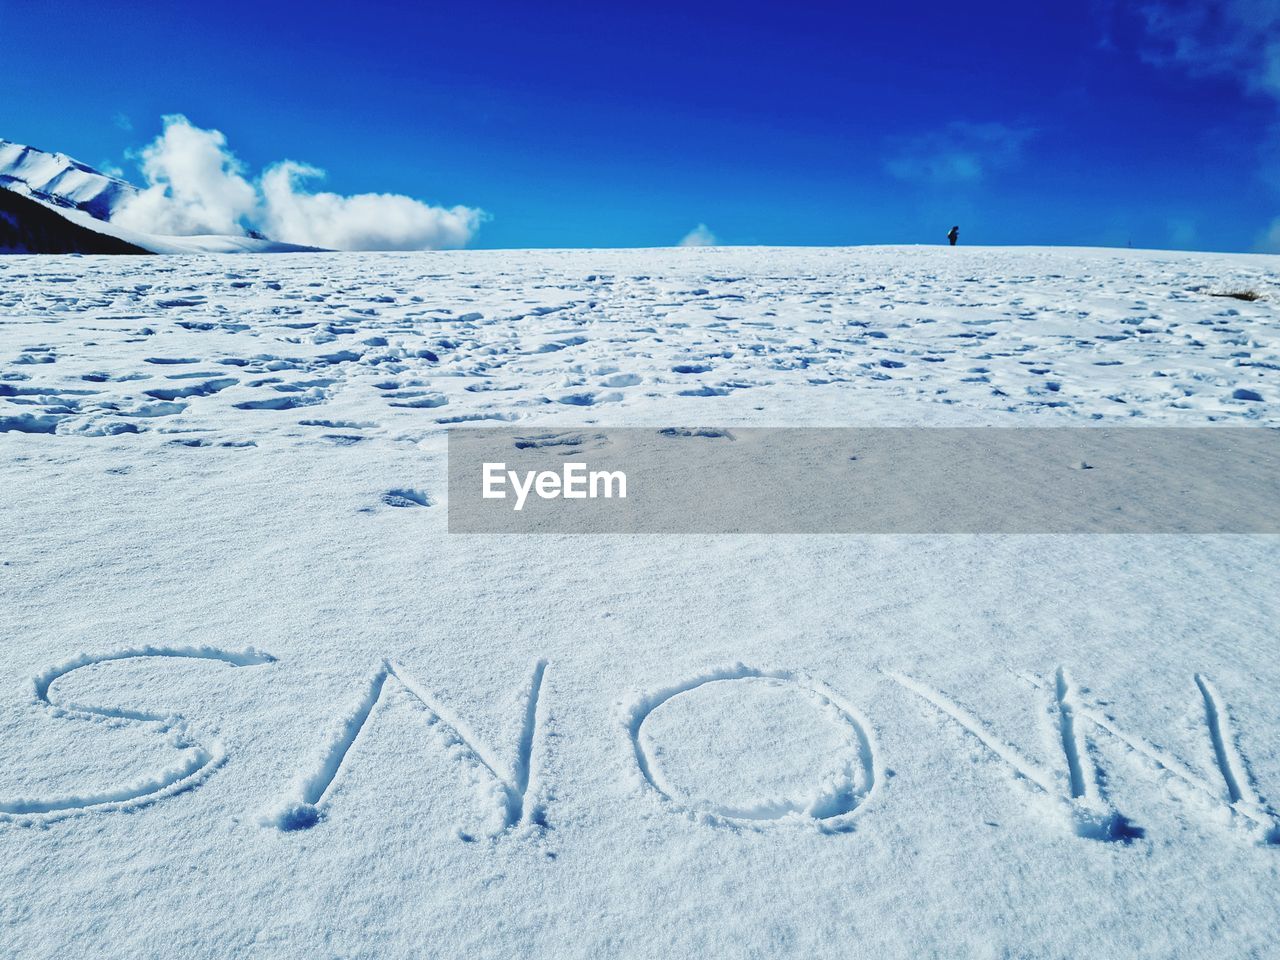 TEXT WRITTEN ON SNOW COVERED LAND AGAINST SKY